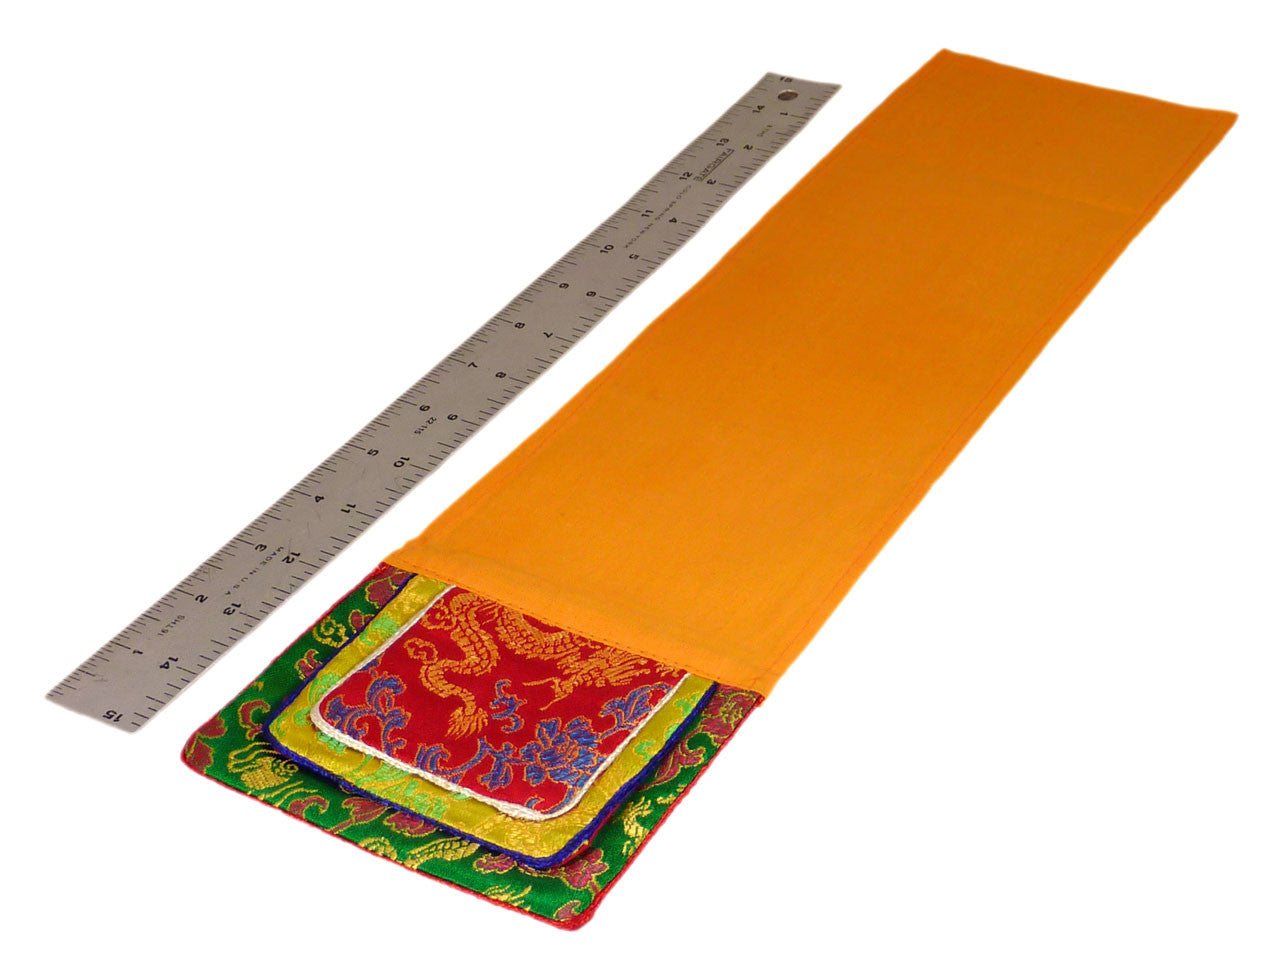 Bookmark is approximately 17.5" long including brocade tab